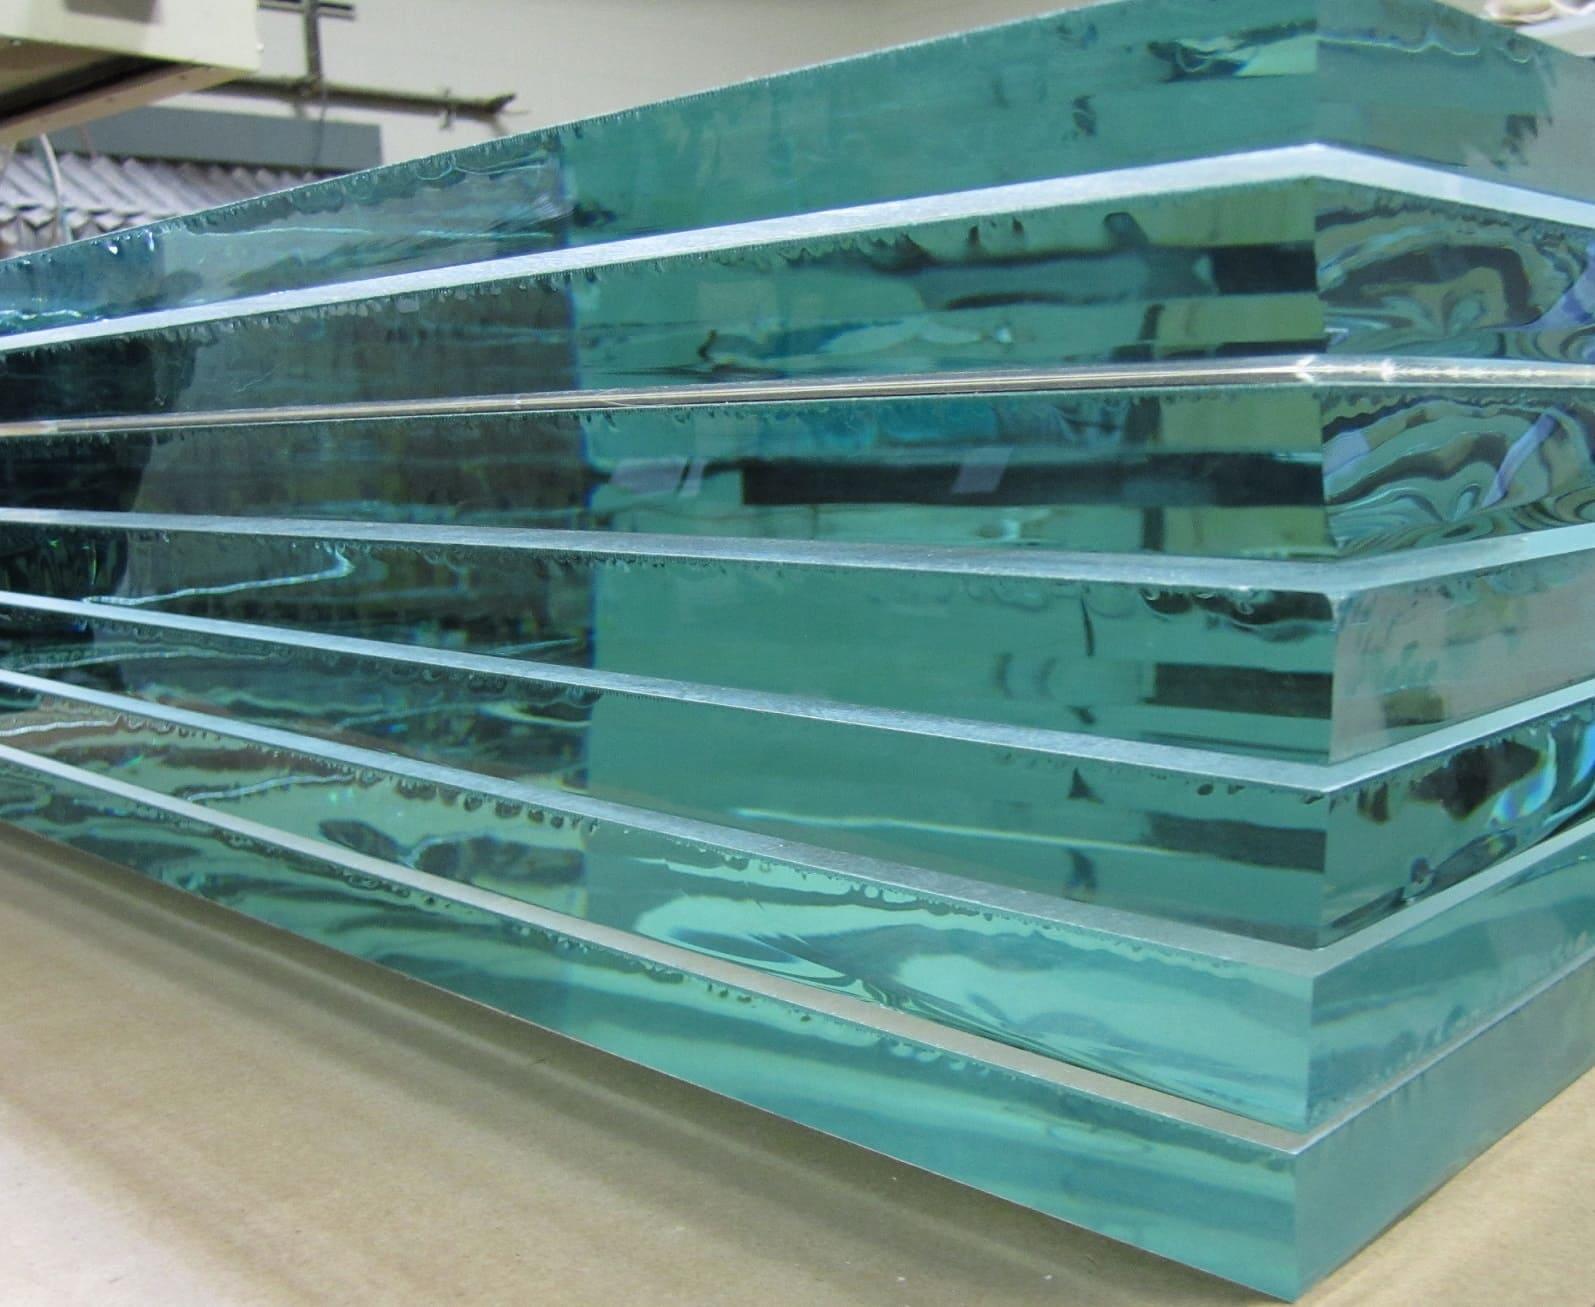 Both types of safety glass are more expensive than standard glass. Source: Swift Glass